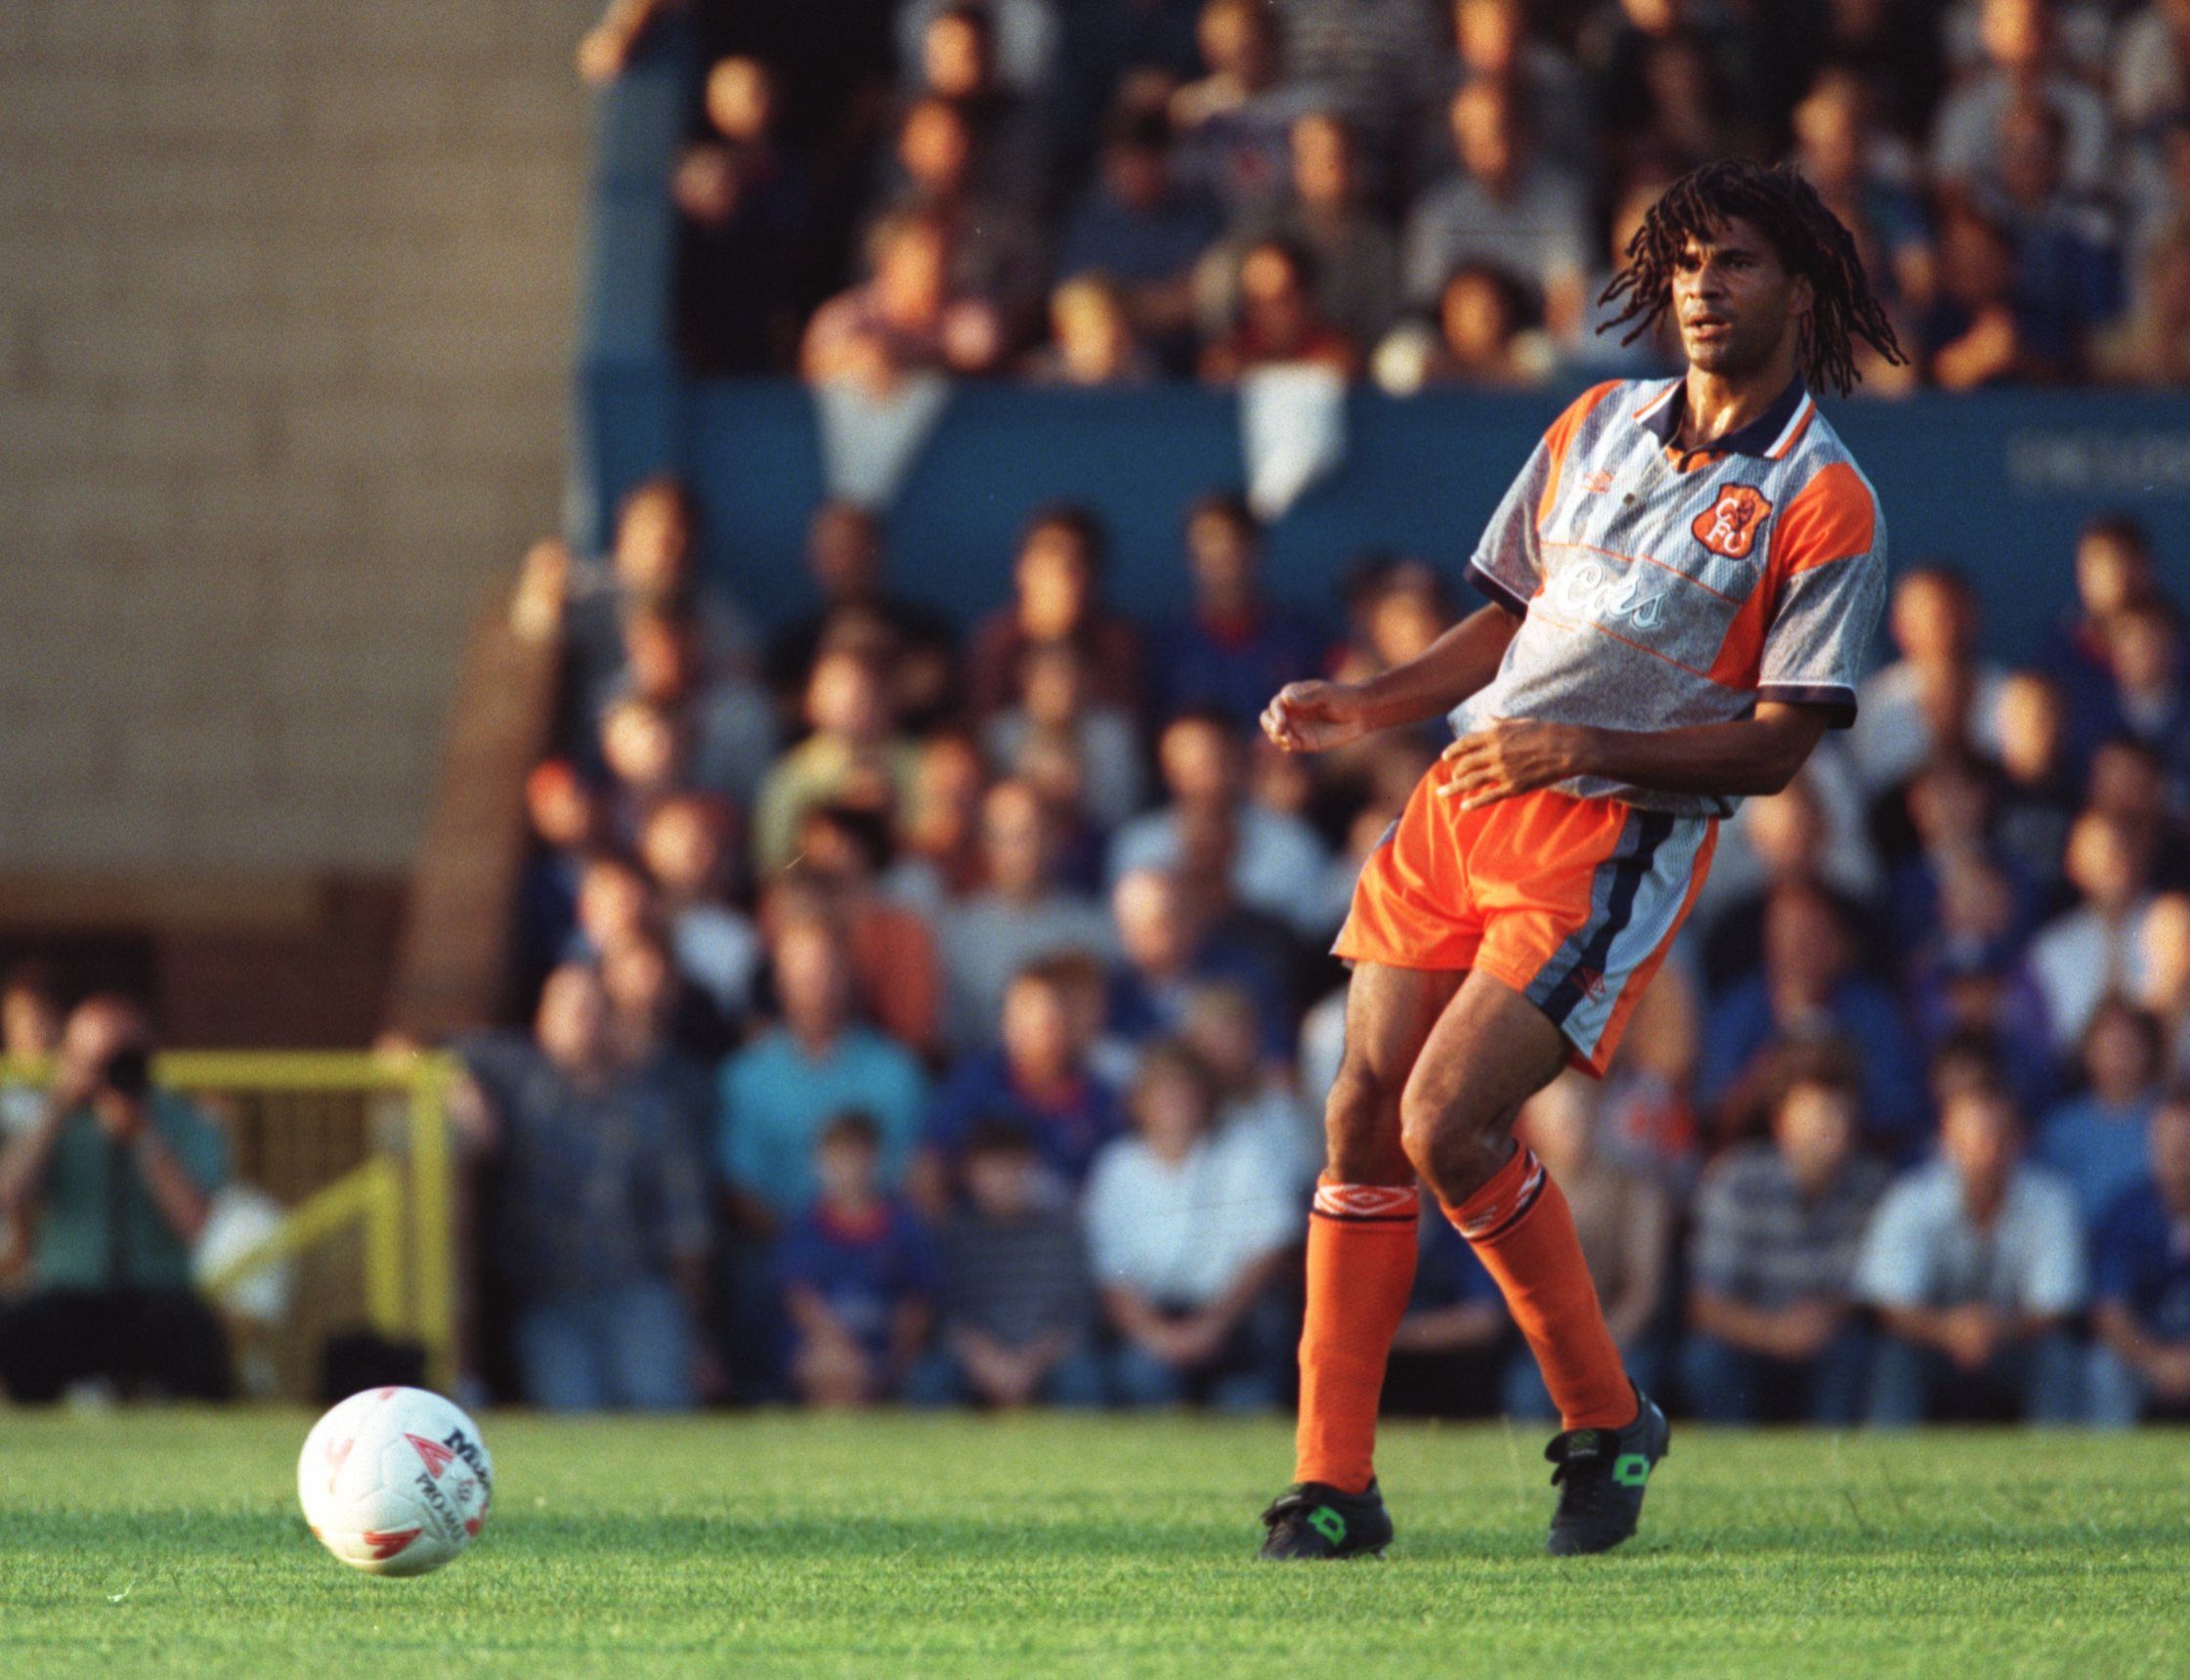  RUUD GULLIT OF HOLLAND IN ACTION FOR HIS NEW CLUB CHELSEA DURING A PRE SEASON FRIENDLY MATCH AGAINST GILLINGHAM 